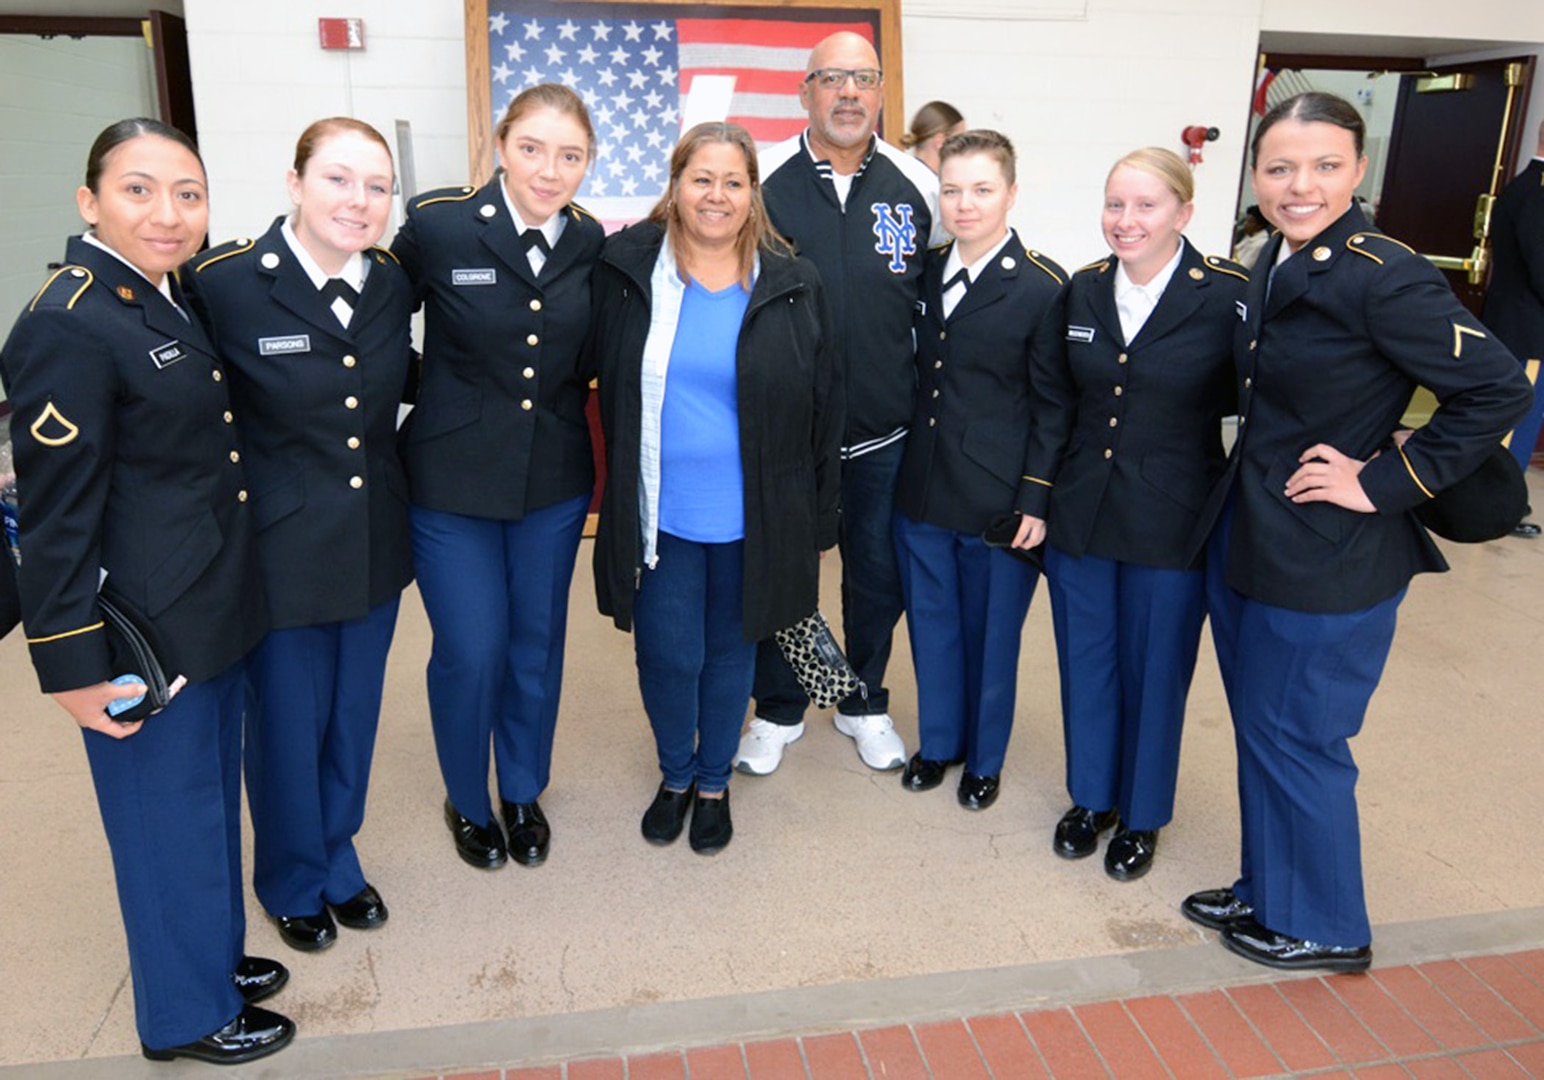 Martha and Eddie Matos with Pvt. Jaqueline Padilla from Victorville, Calif.; Pvt. Katlin Parsons from Huntsville, Ala.; Pvt Catlin Colgrove from Indianapolis, Ind.; Pvt. Destiny Watts from Union City, Tenn.; Pvt. Britani Woodworth from Kendall, Wisc.; and Private Lindy Wayland from Burton, Ill.